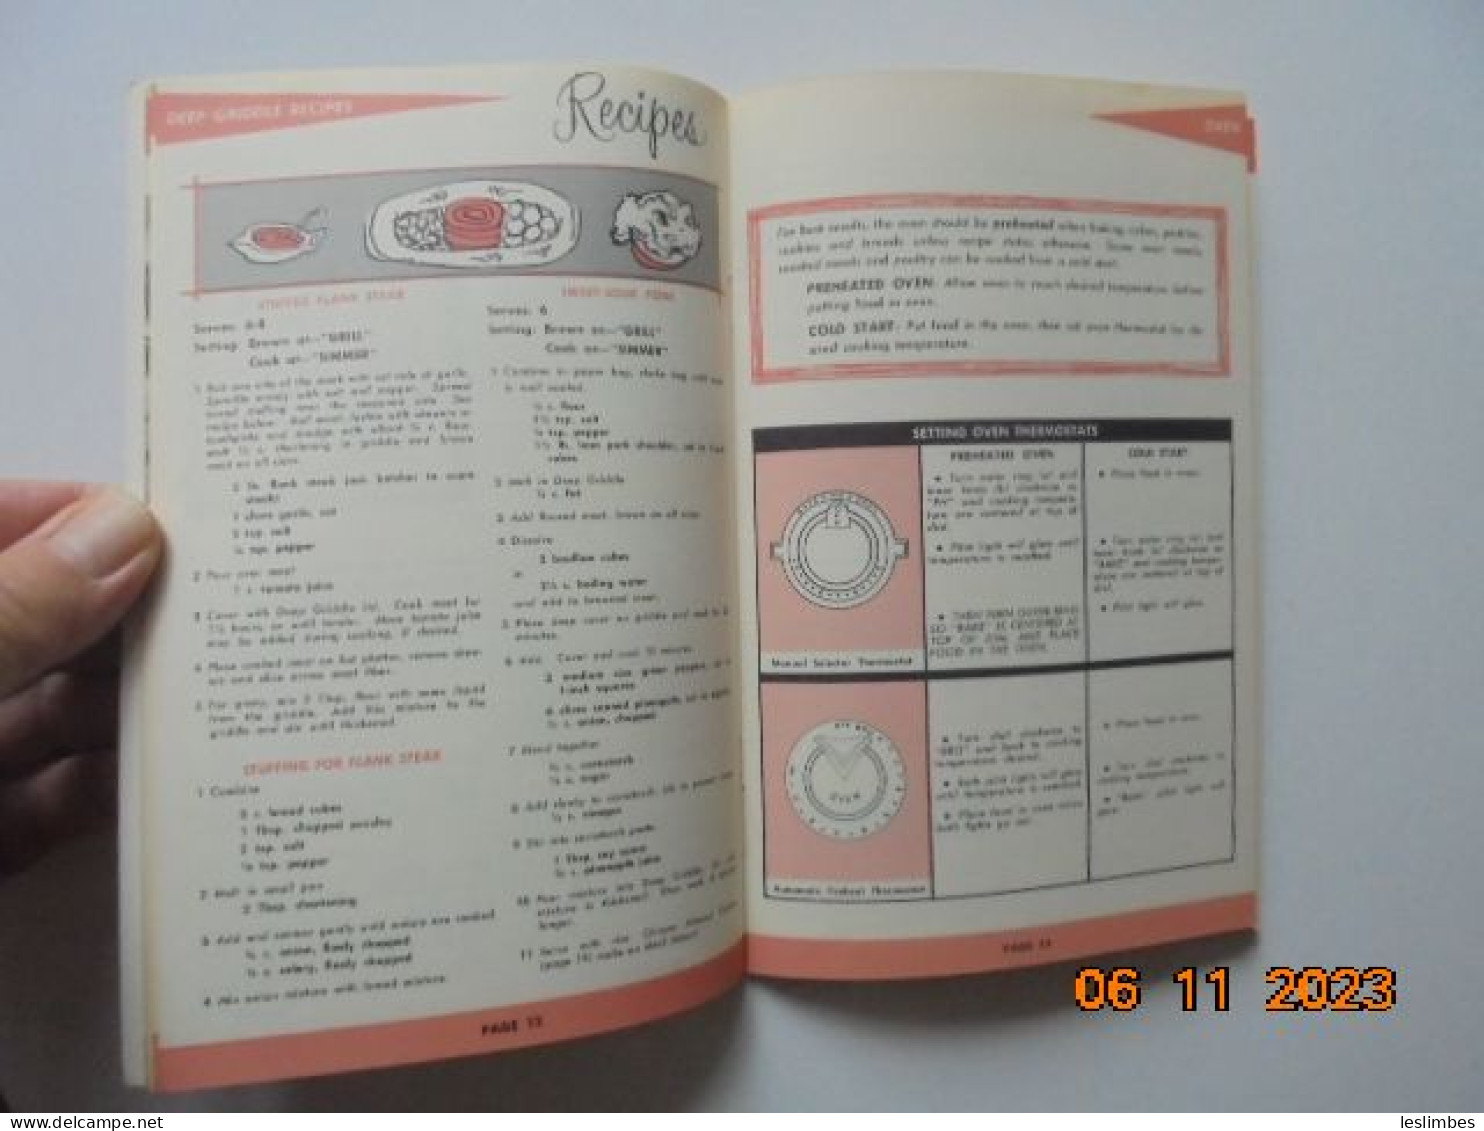 Electric Cooking With Your Kenmore: Recipes And Instructions - Sears, Roebuck And Company 1956 - American (US)